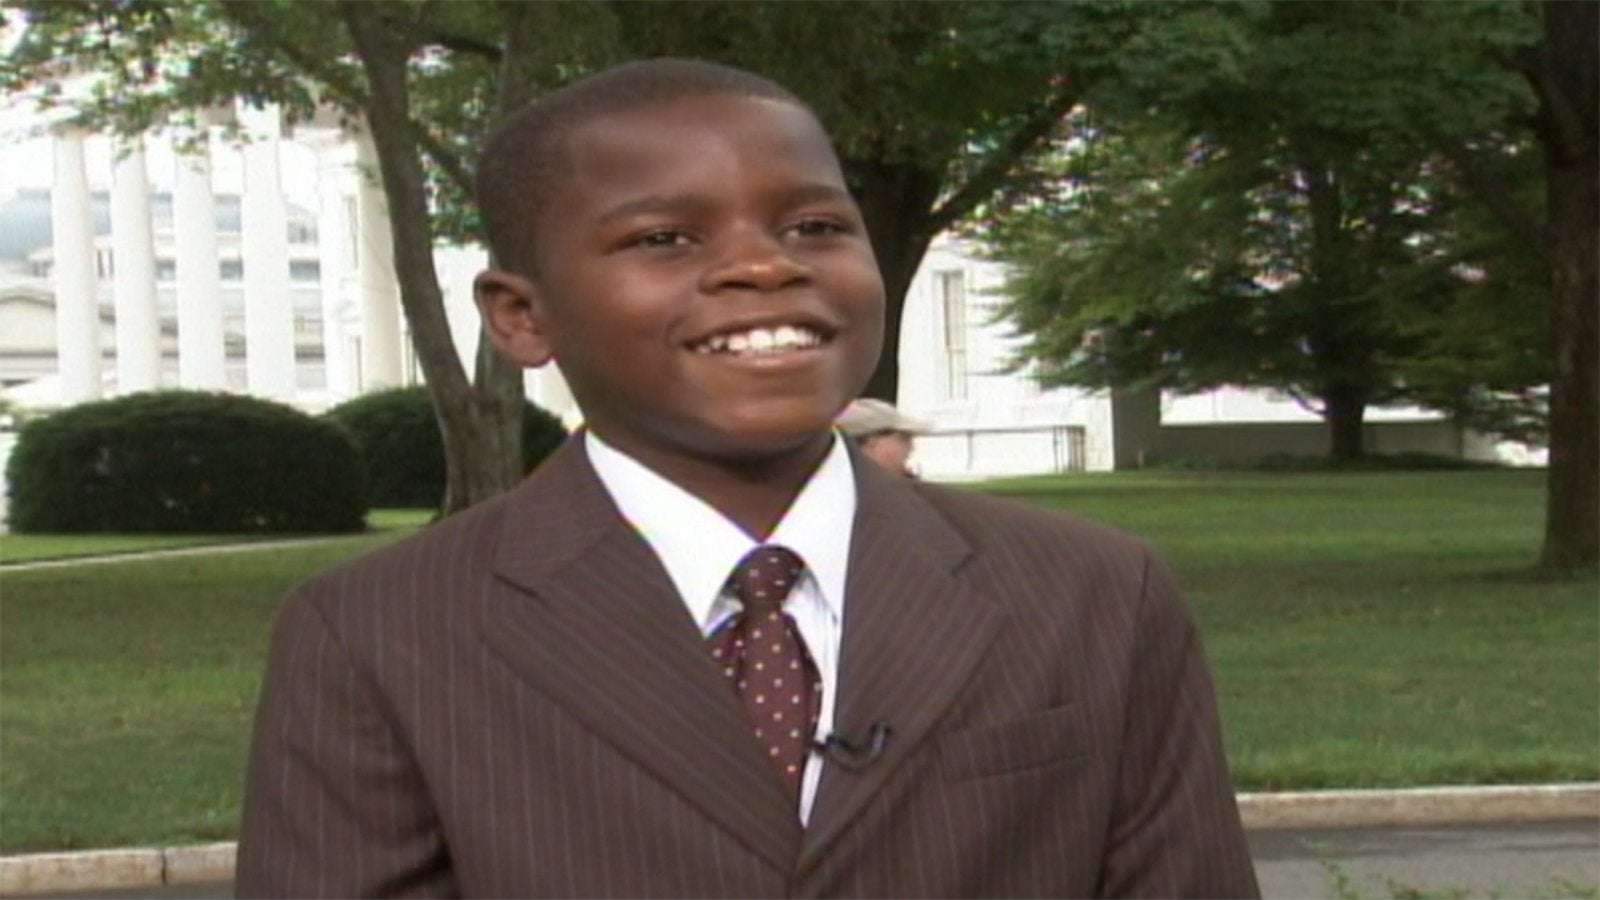 image for Damon Weaver, kid reporter who interviewed Barack Obama at White House, dies at 23